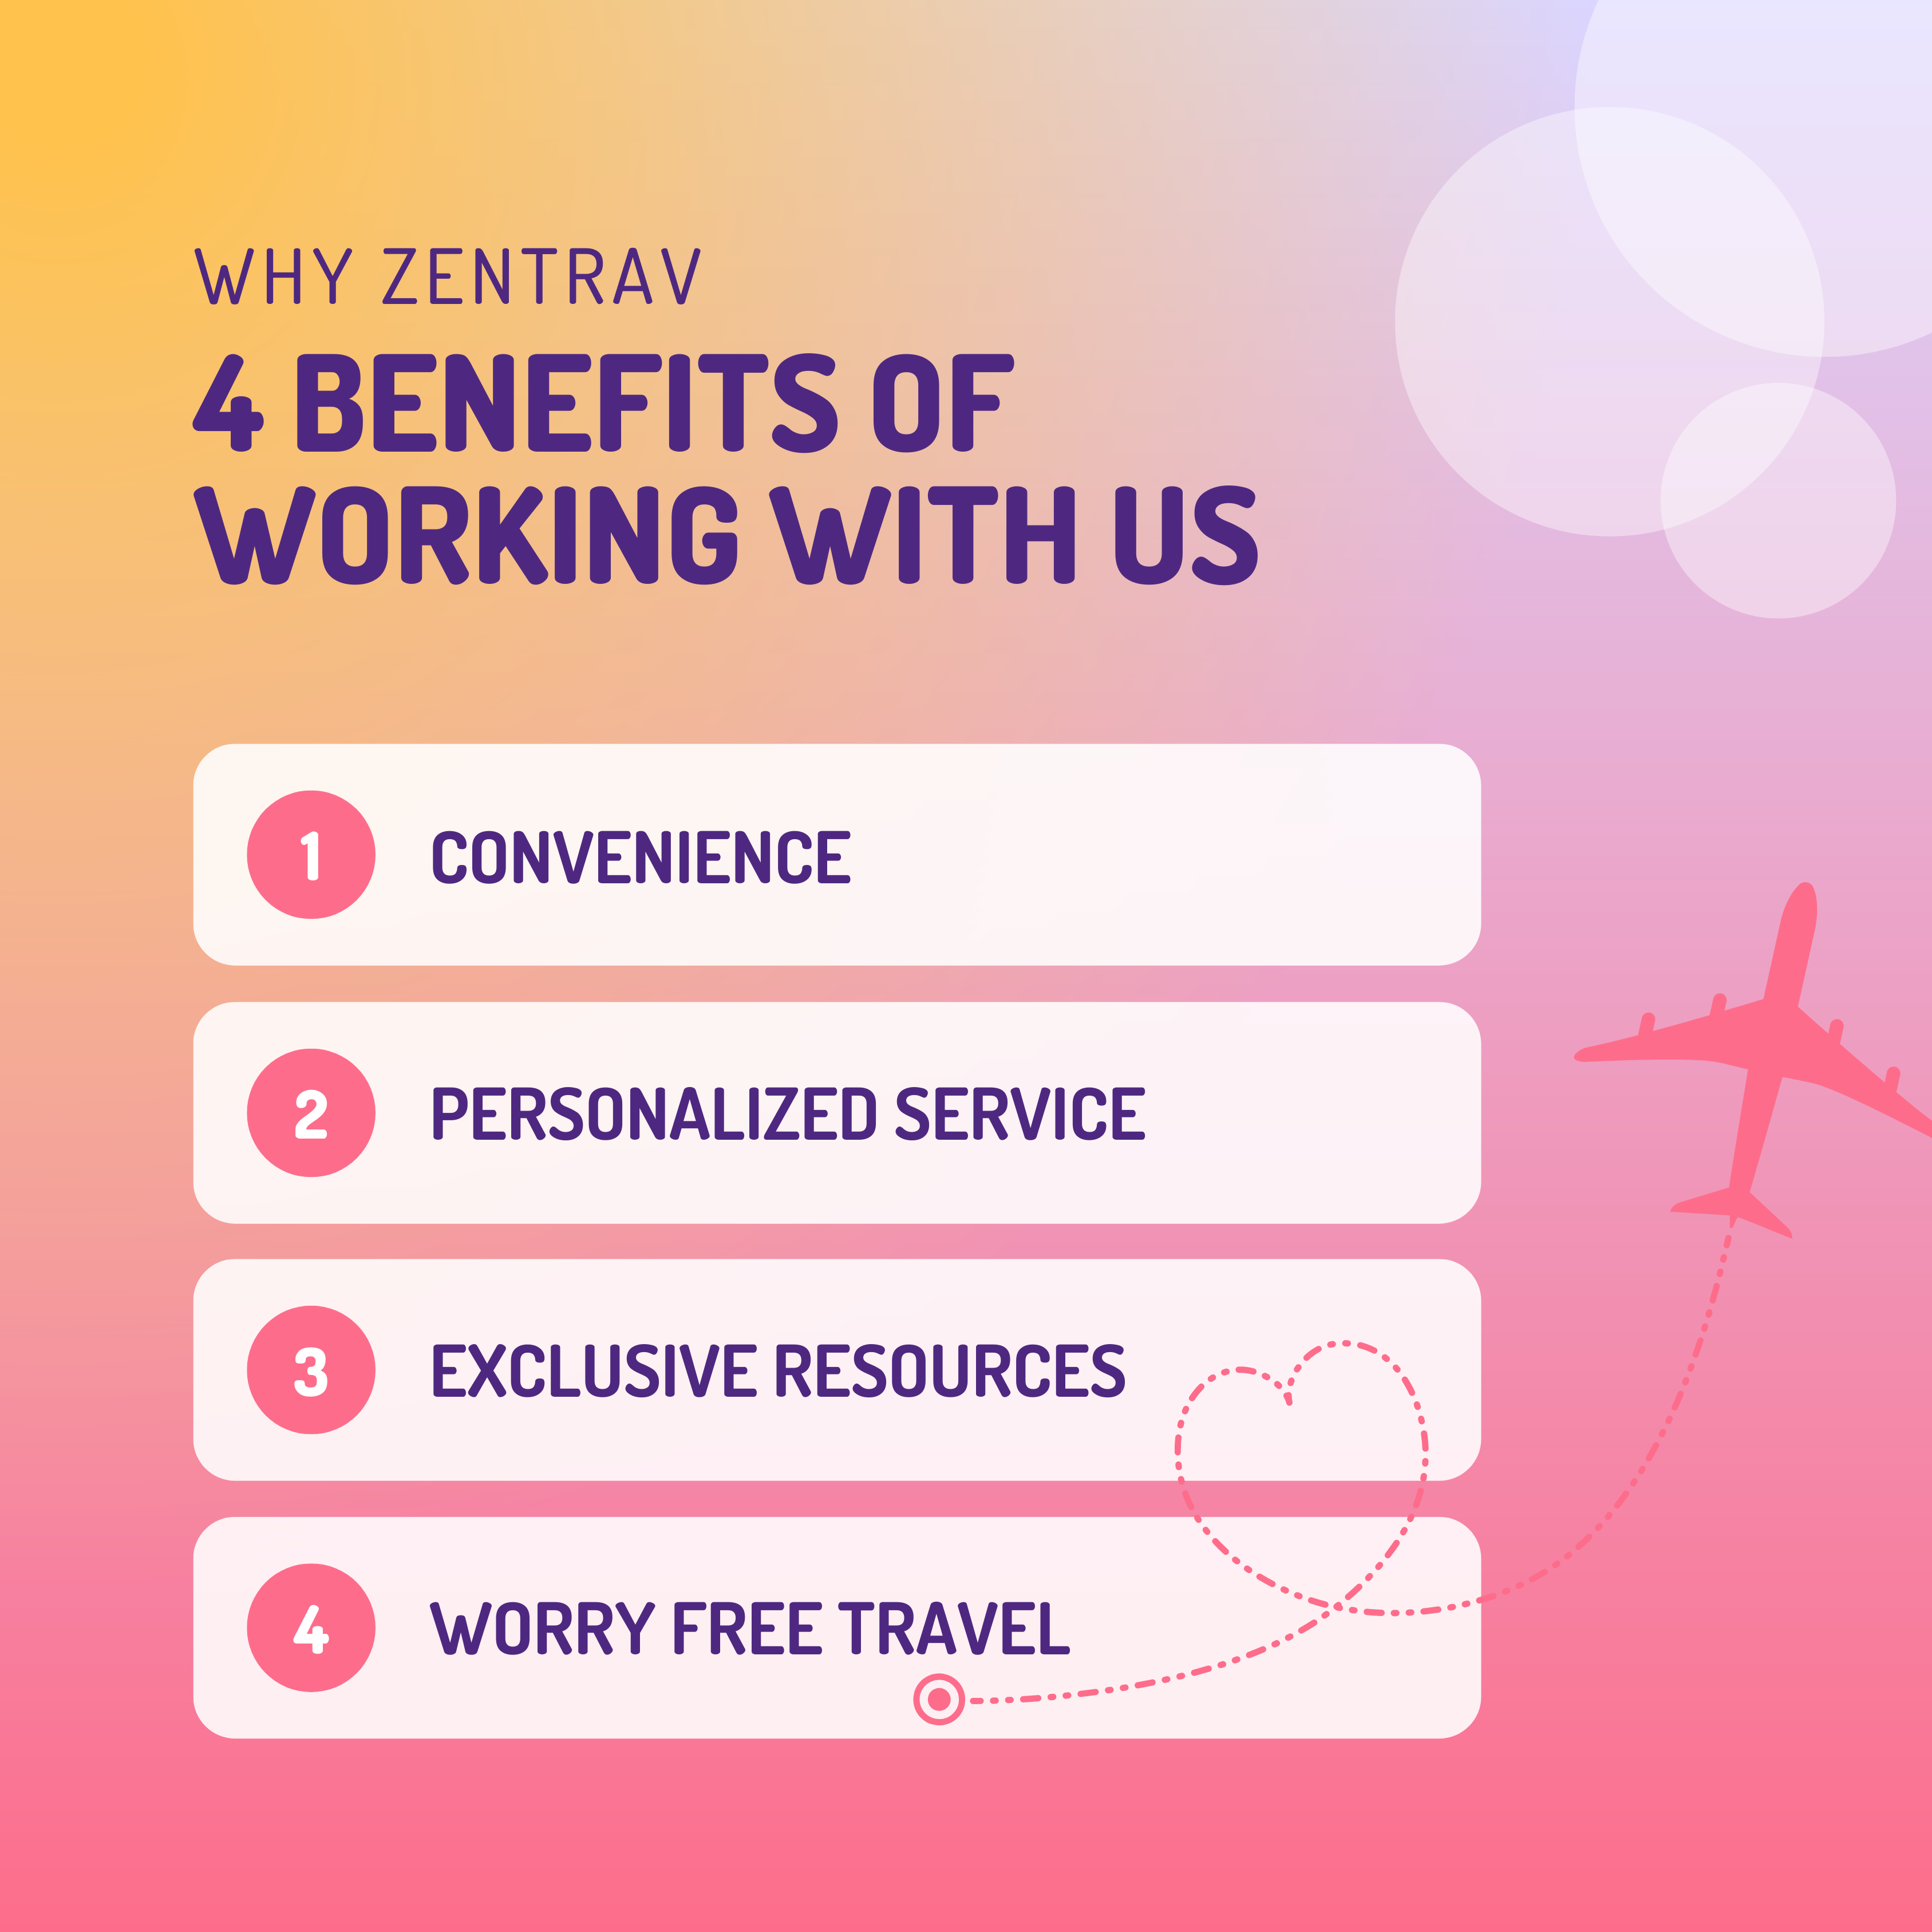 Why Zentrav 4 Benefits of working with us: Convenience, personalized service, exclusive resources, worry free travel